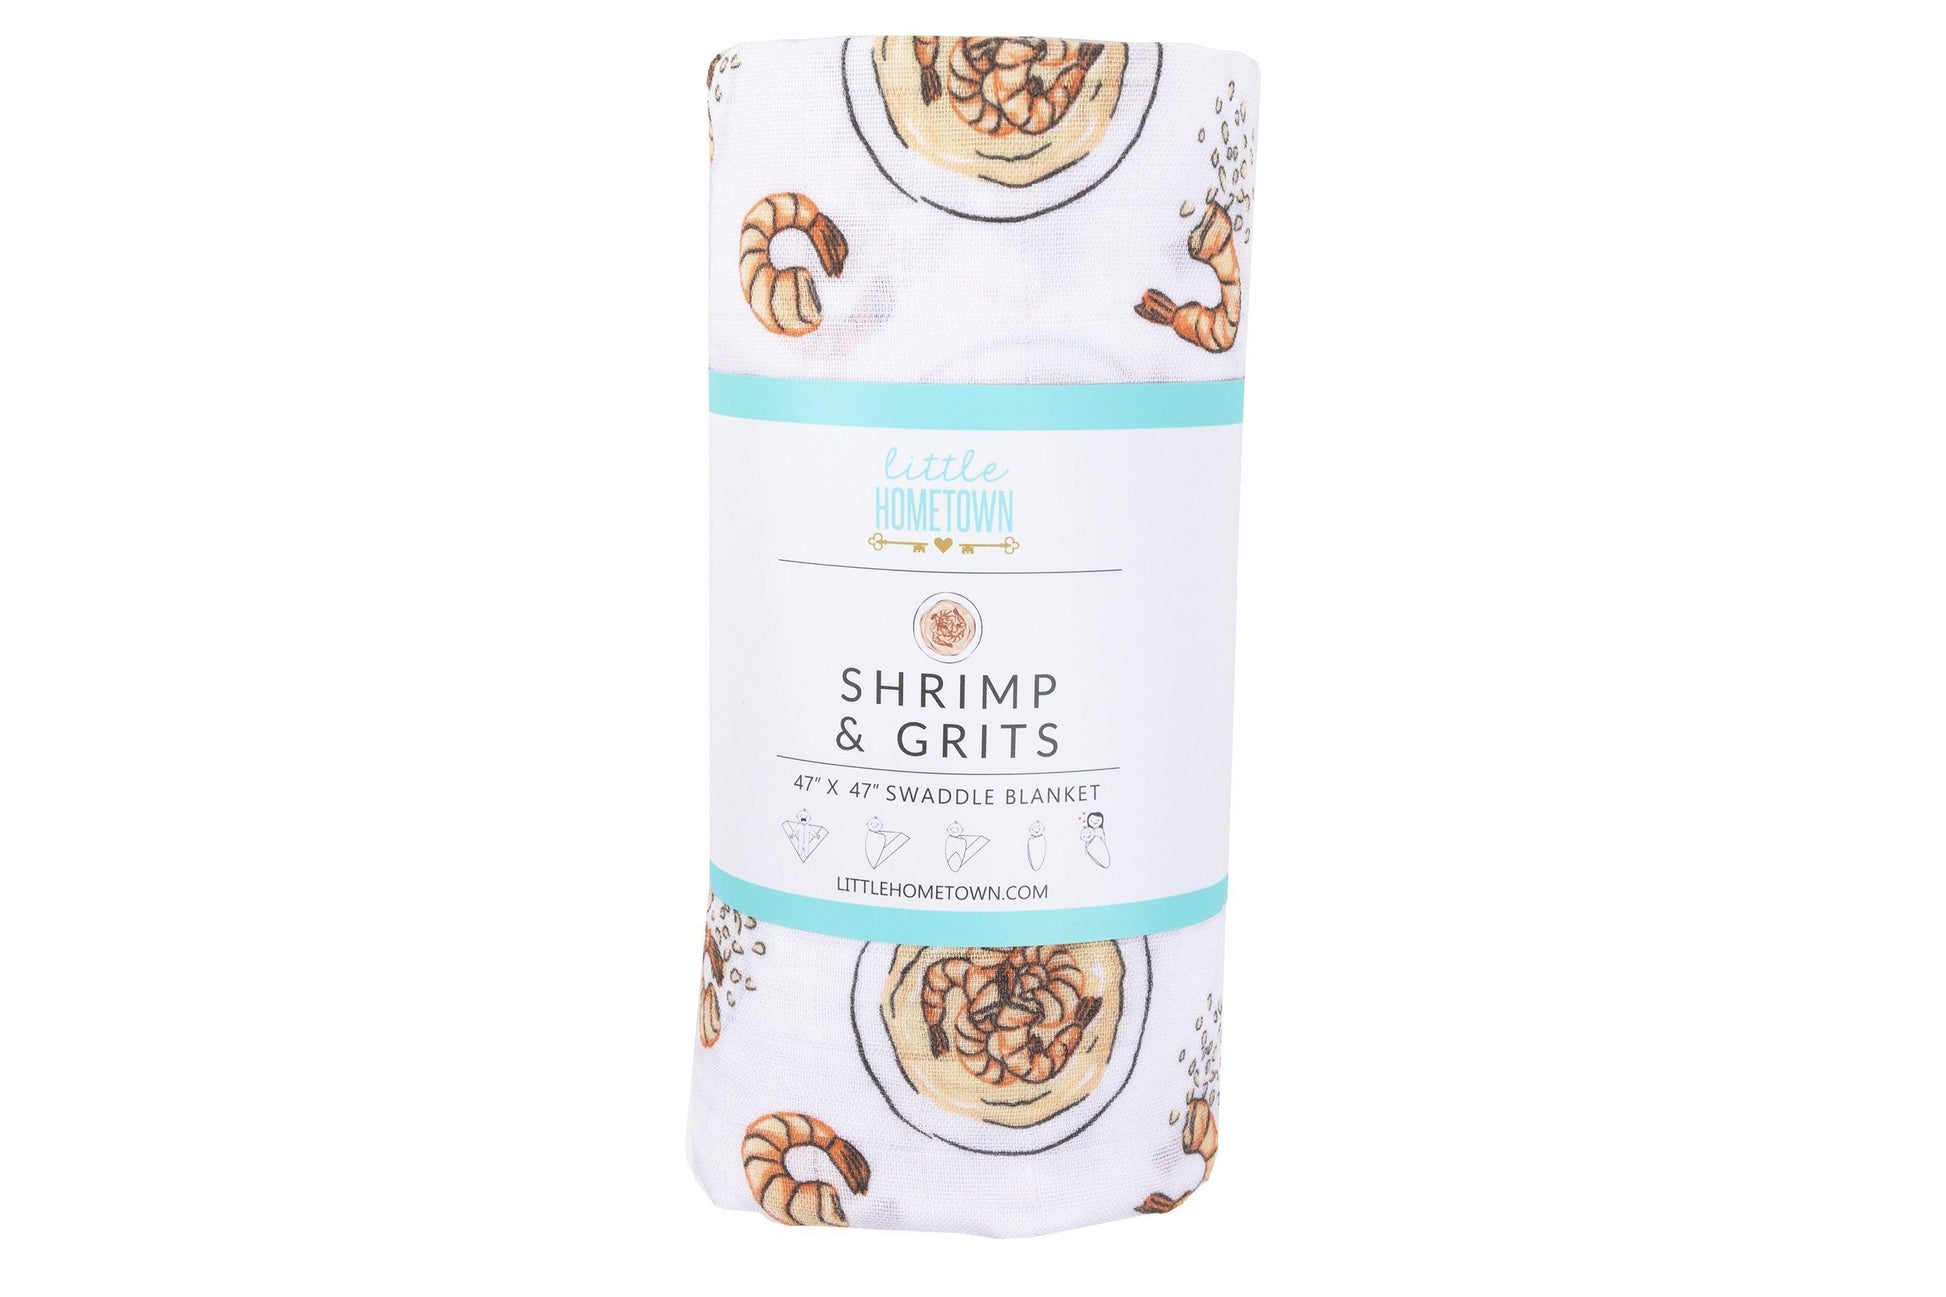 White muslin swaddle blanket with playful shrimp and grits illustrations, featuring vibrant orange and yellow hues.